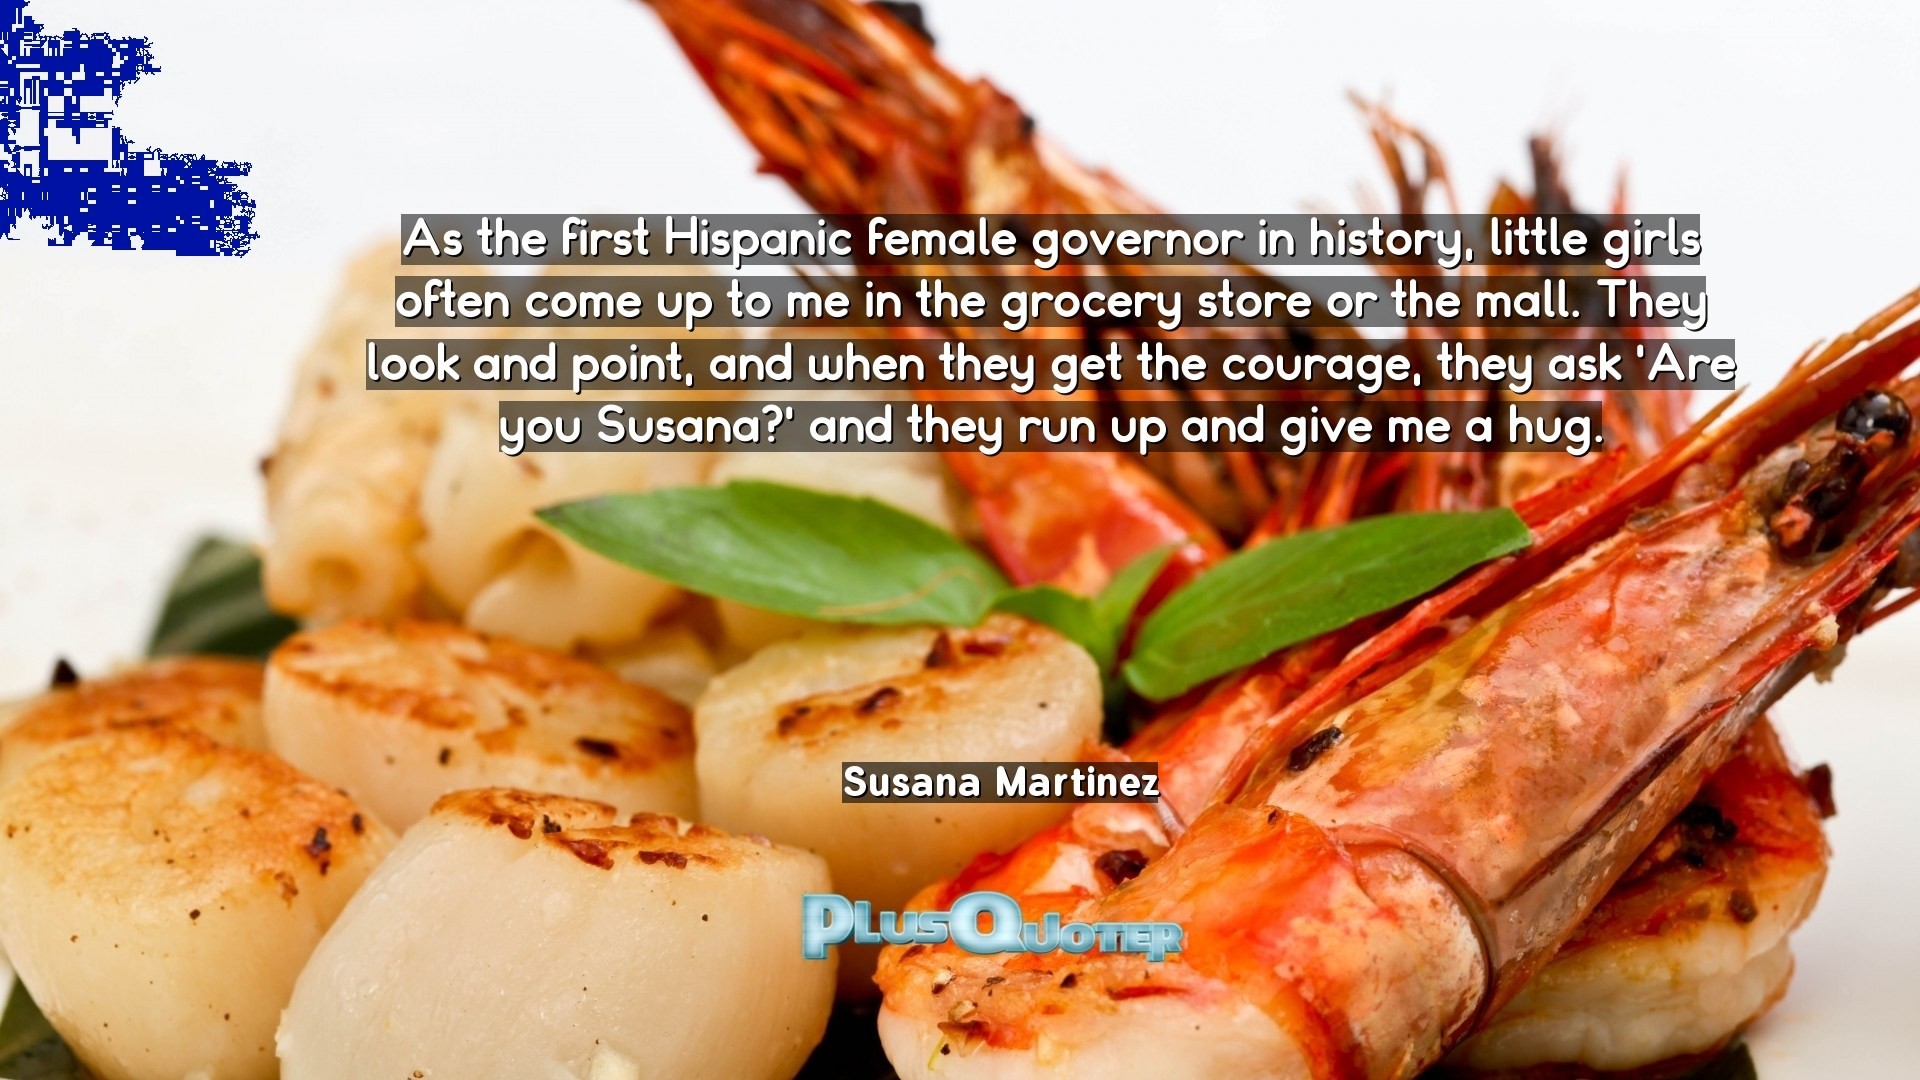 1920x1080 Download Wallpaper with inspirational Quotes- "As the first Hispanic female  governor in history,